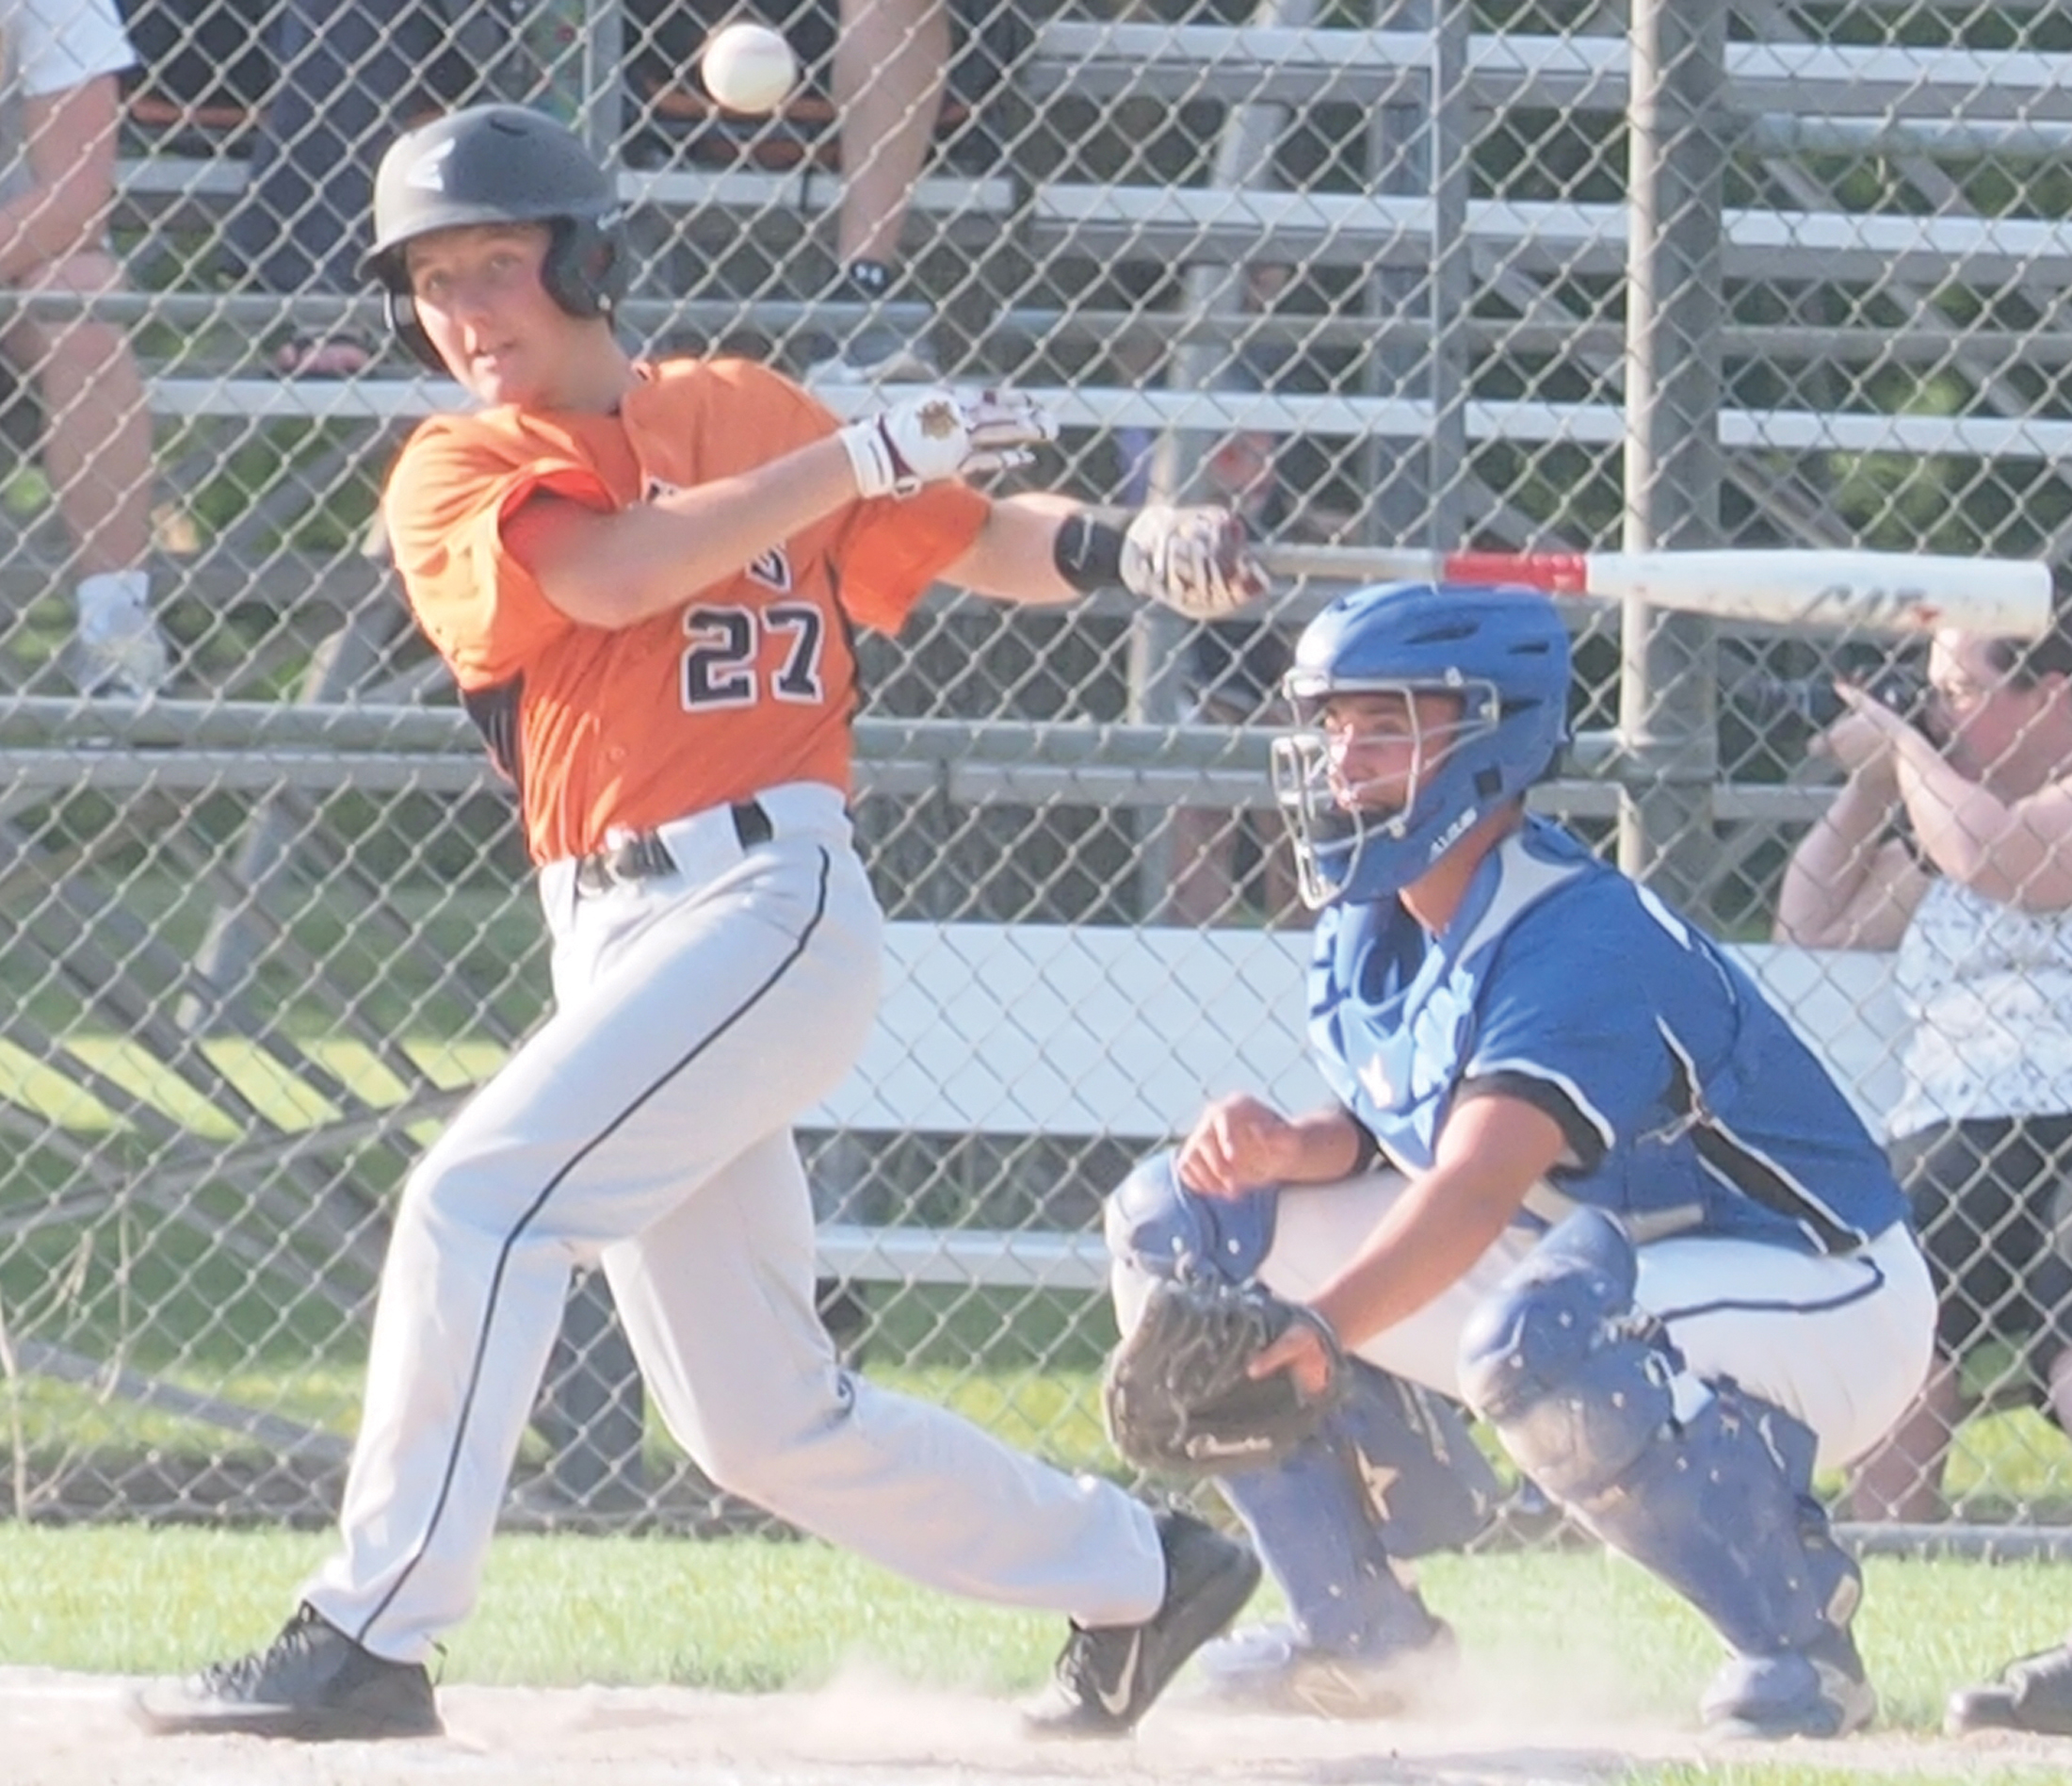 Early thunder leads Comets past Cadets, 10-2